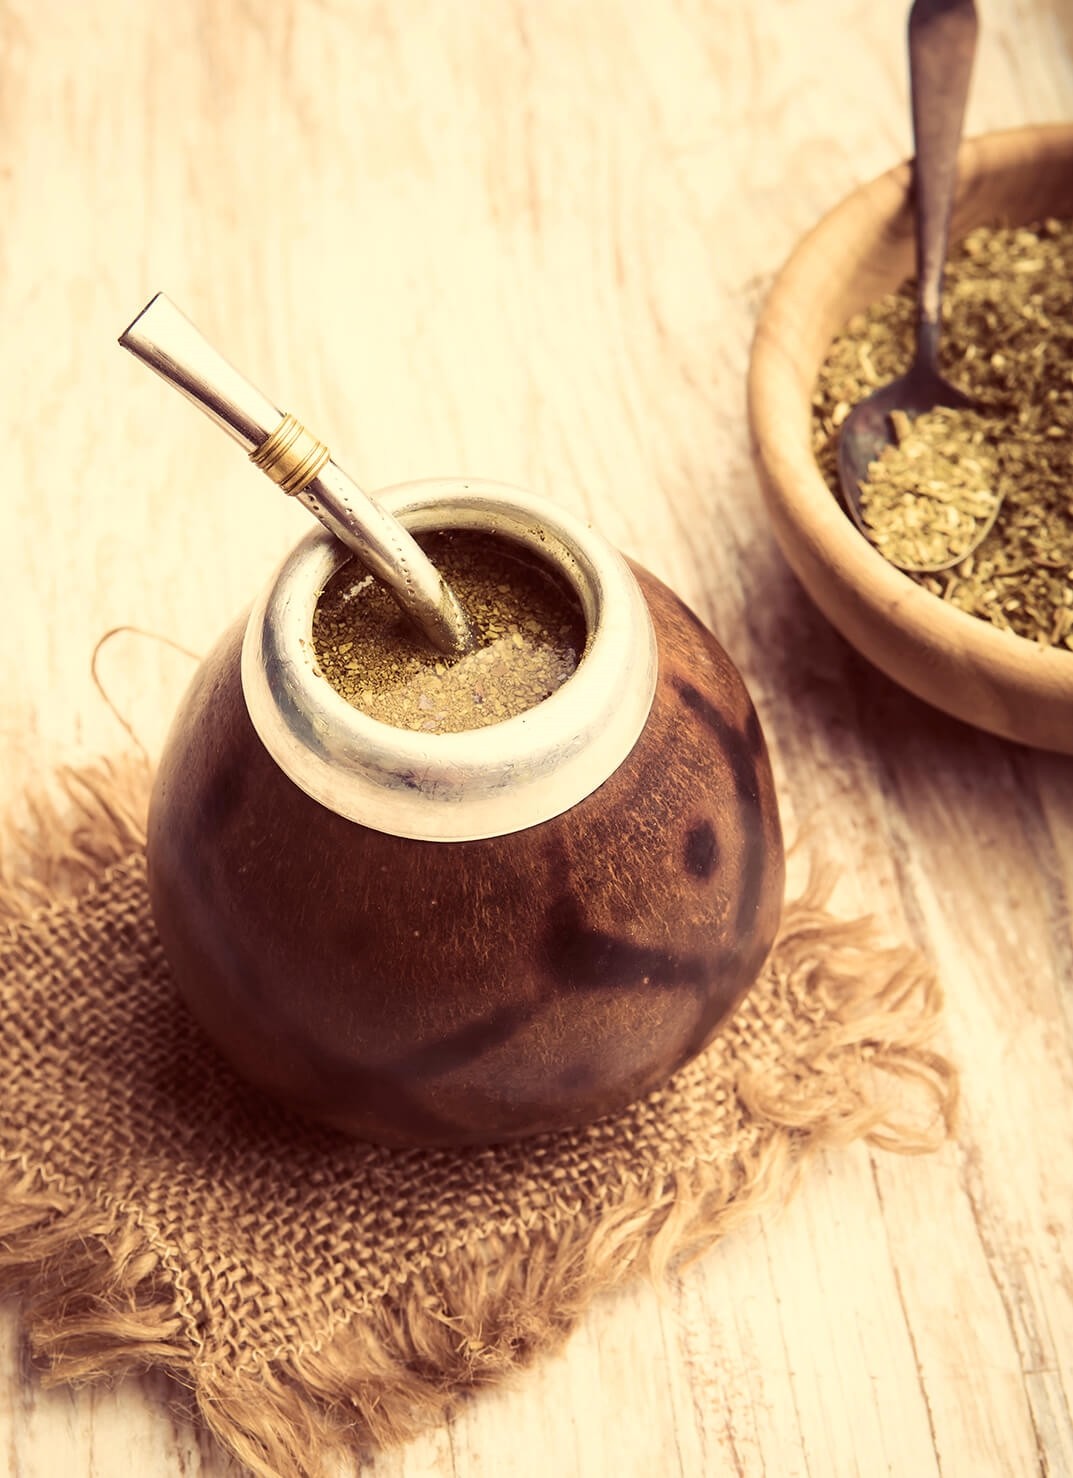 The secrets of Mate - 'The drink of friendship'